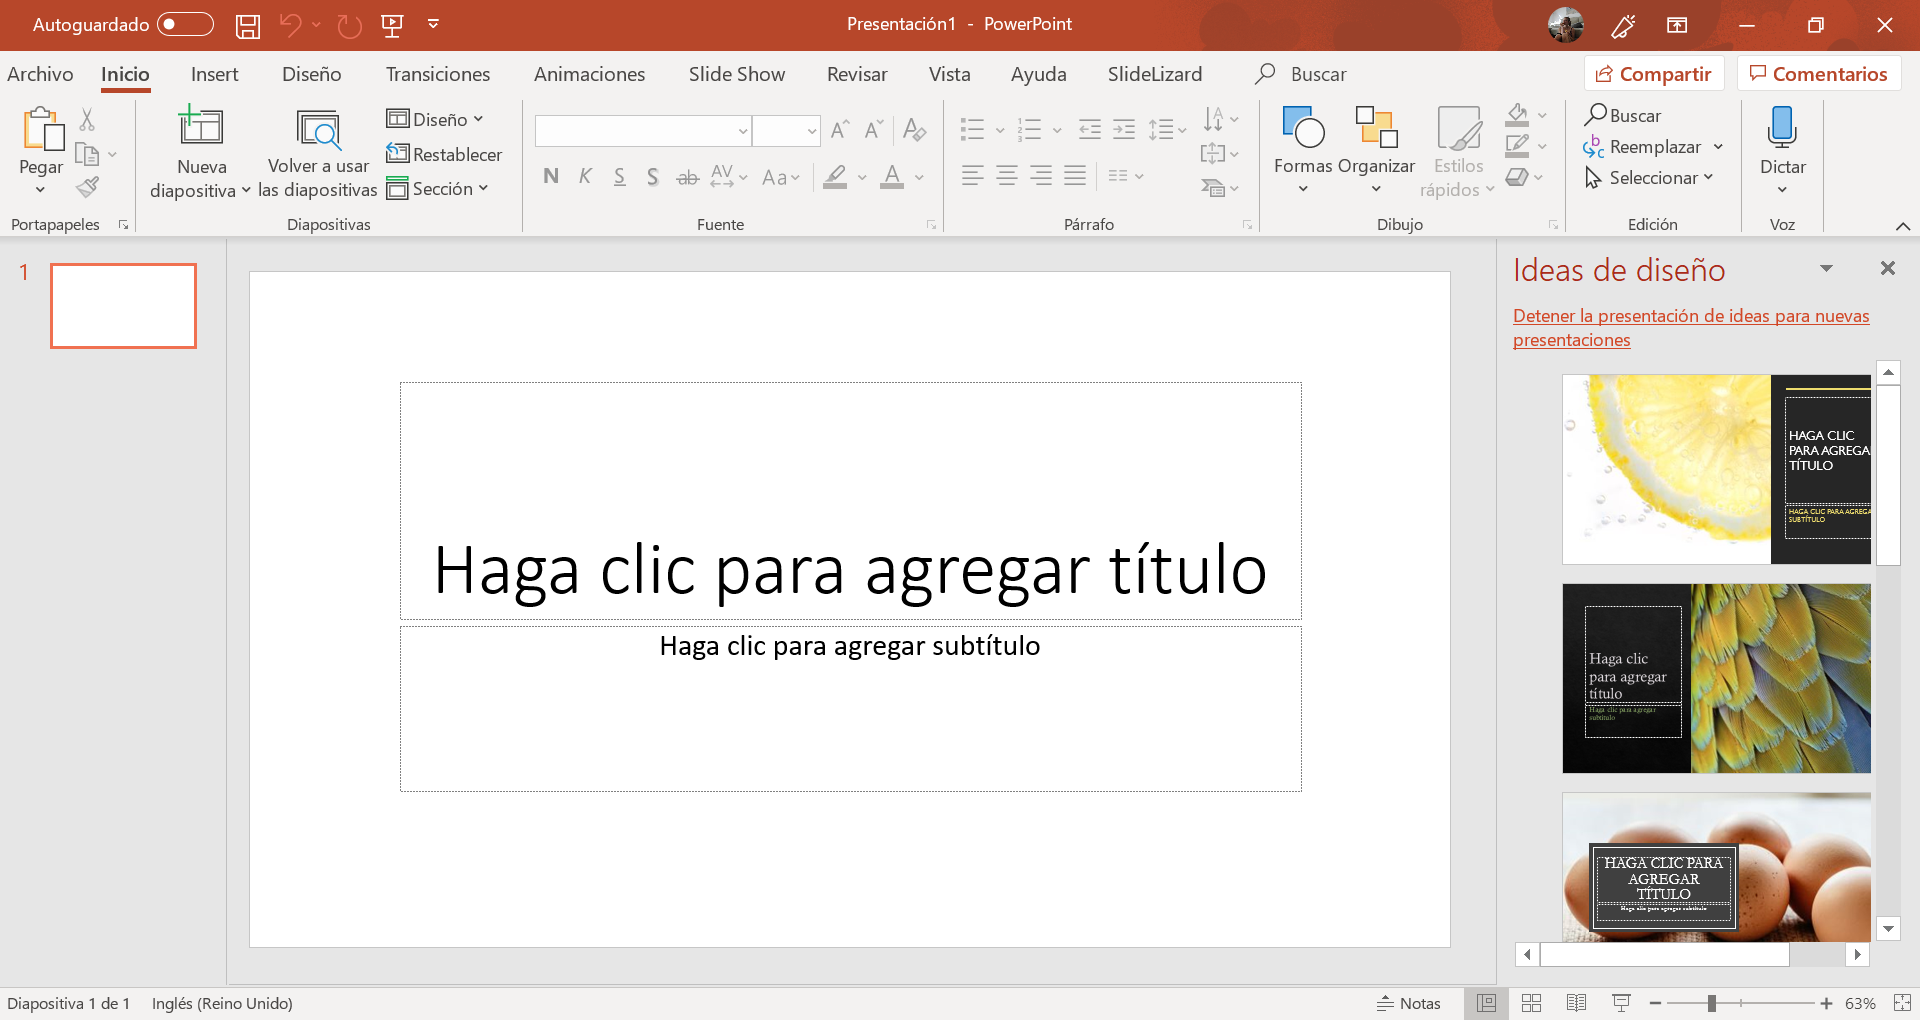 How to install powerpoint themes - angeldast